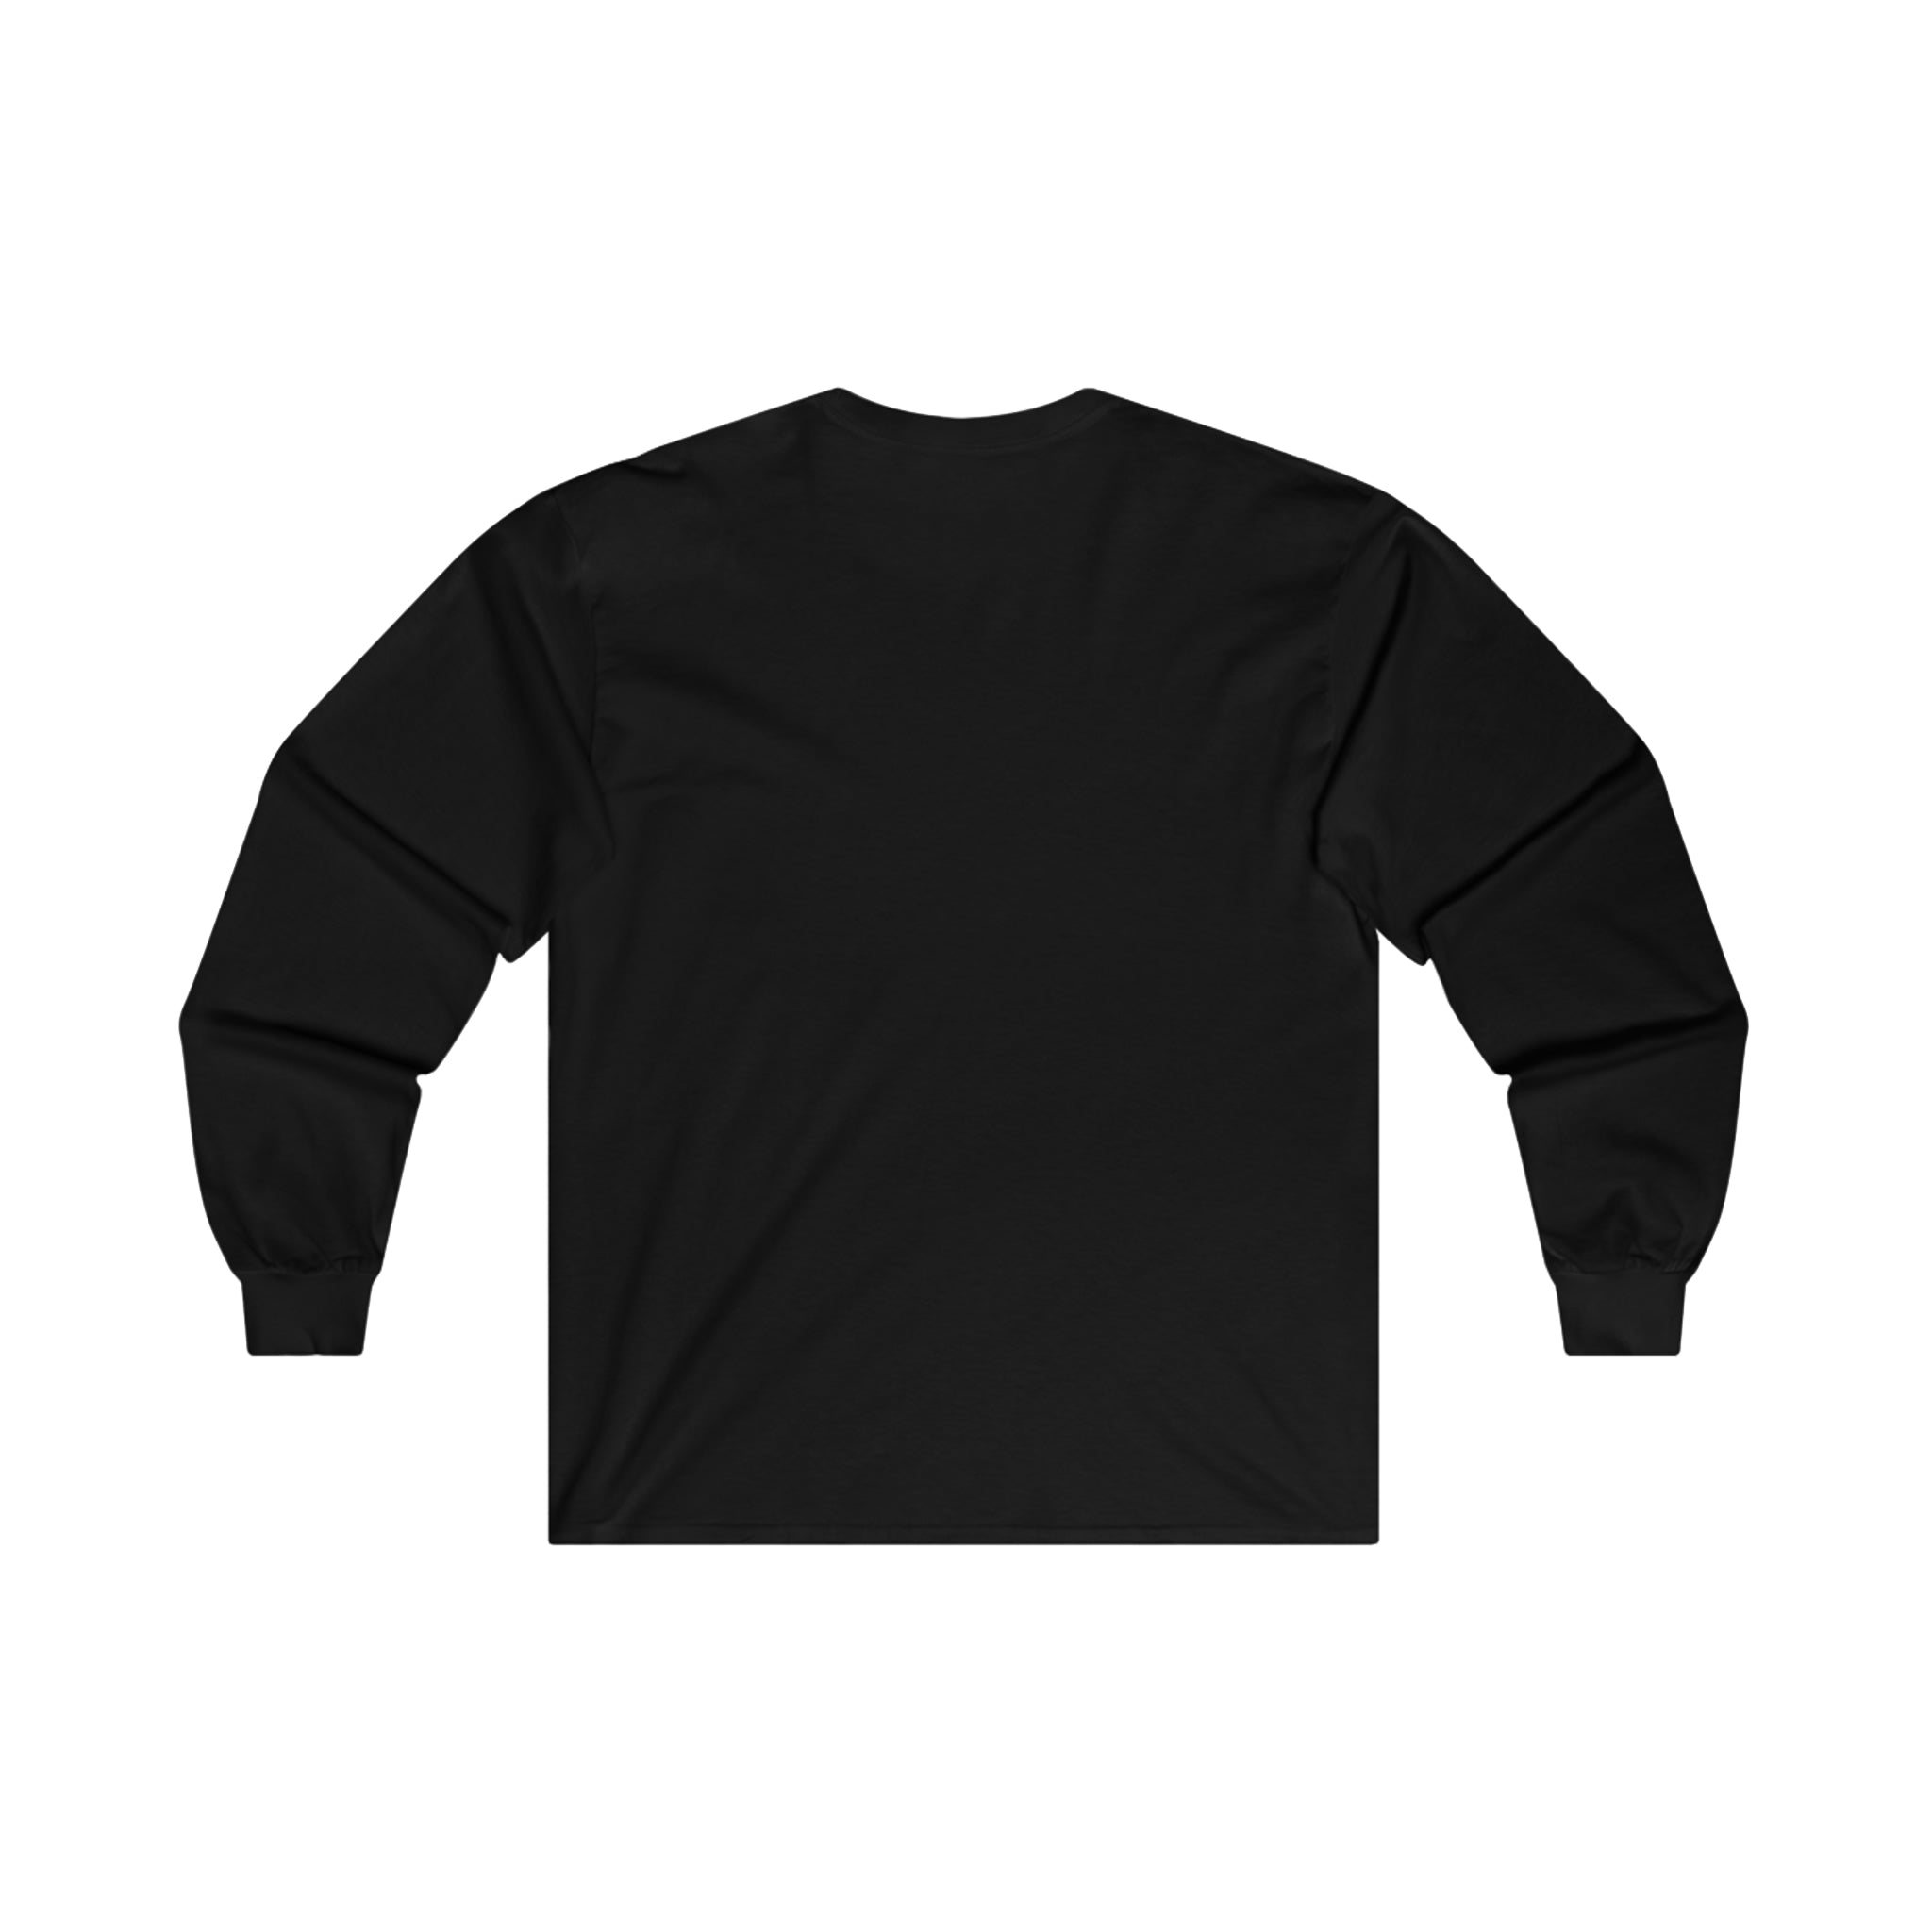 Do not under any circumstances give me a cigarette - Ultra Cotton Long Sleeve Tee